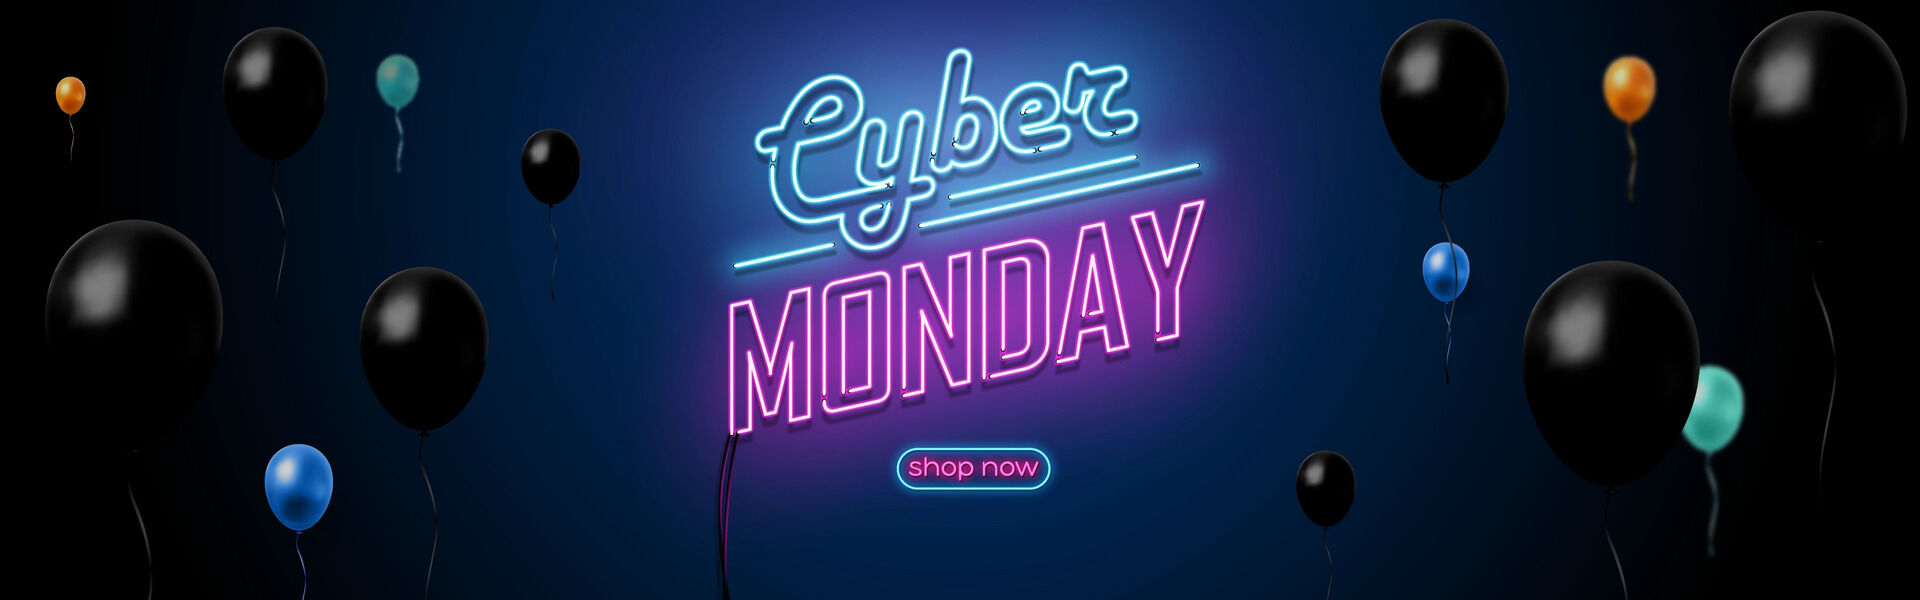 Cyber Monday special offers